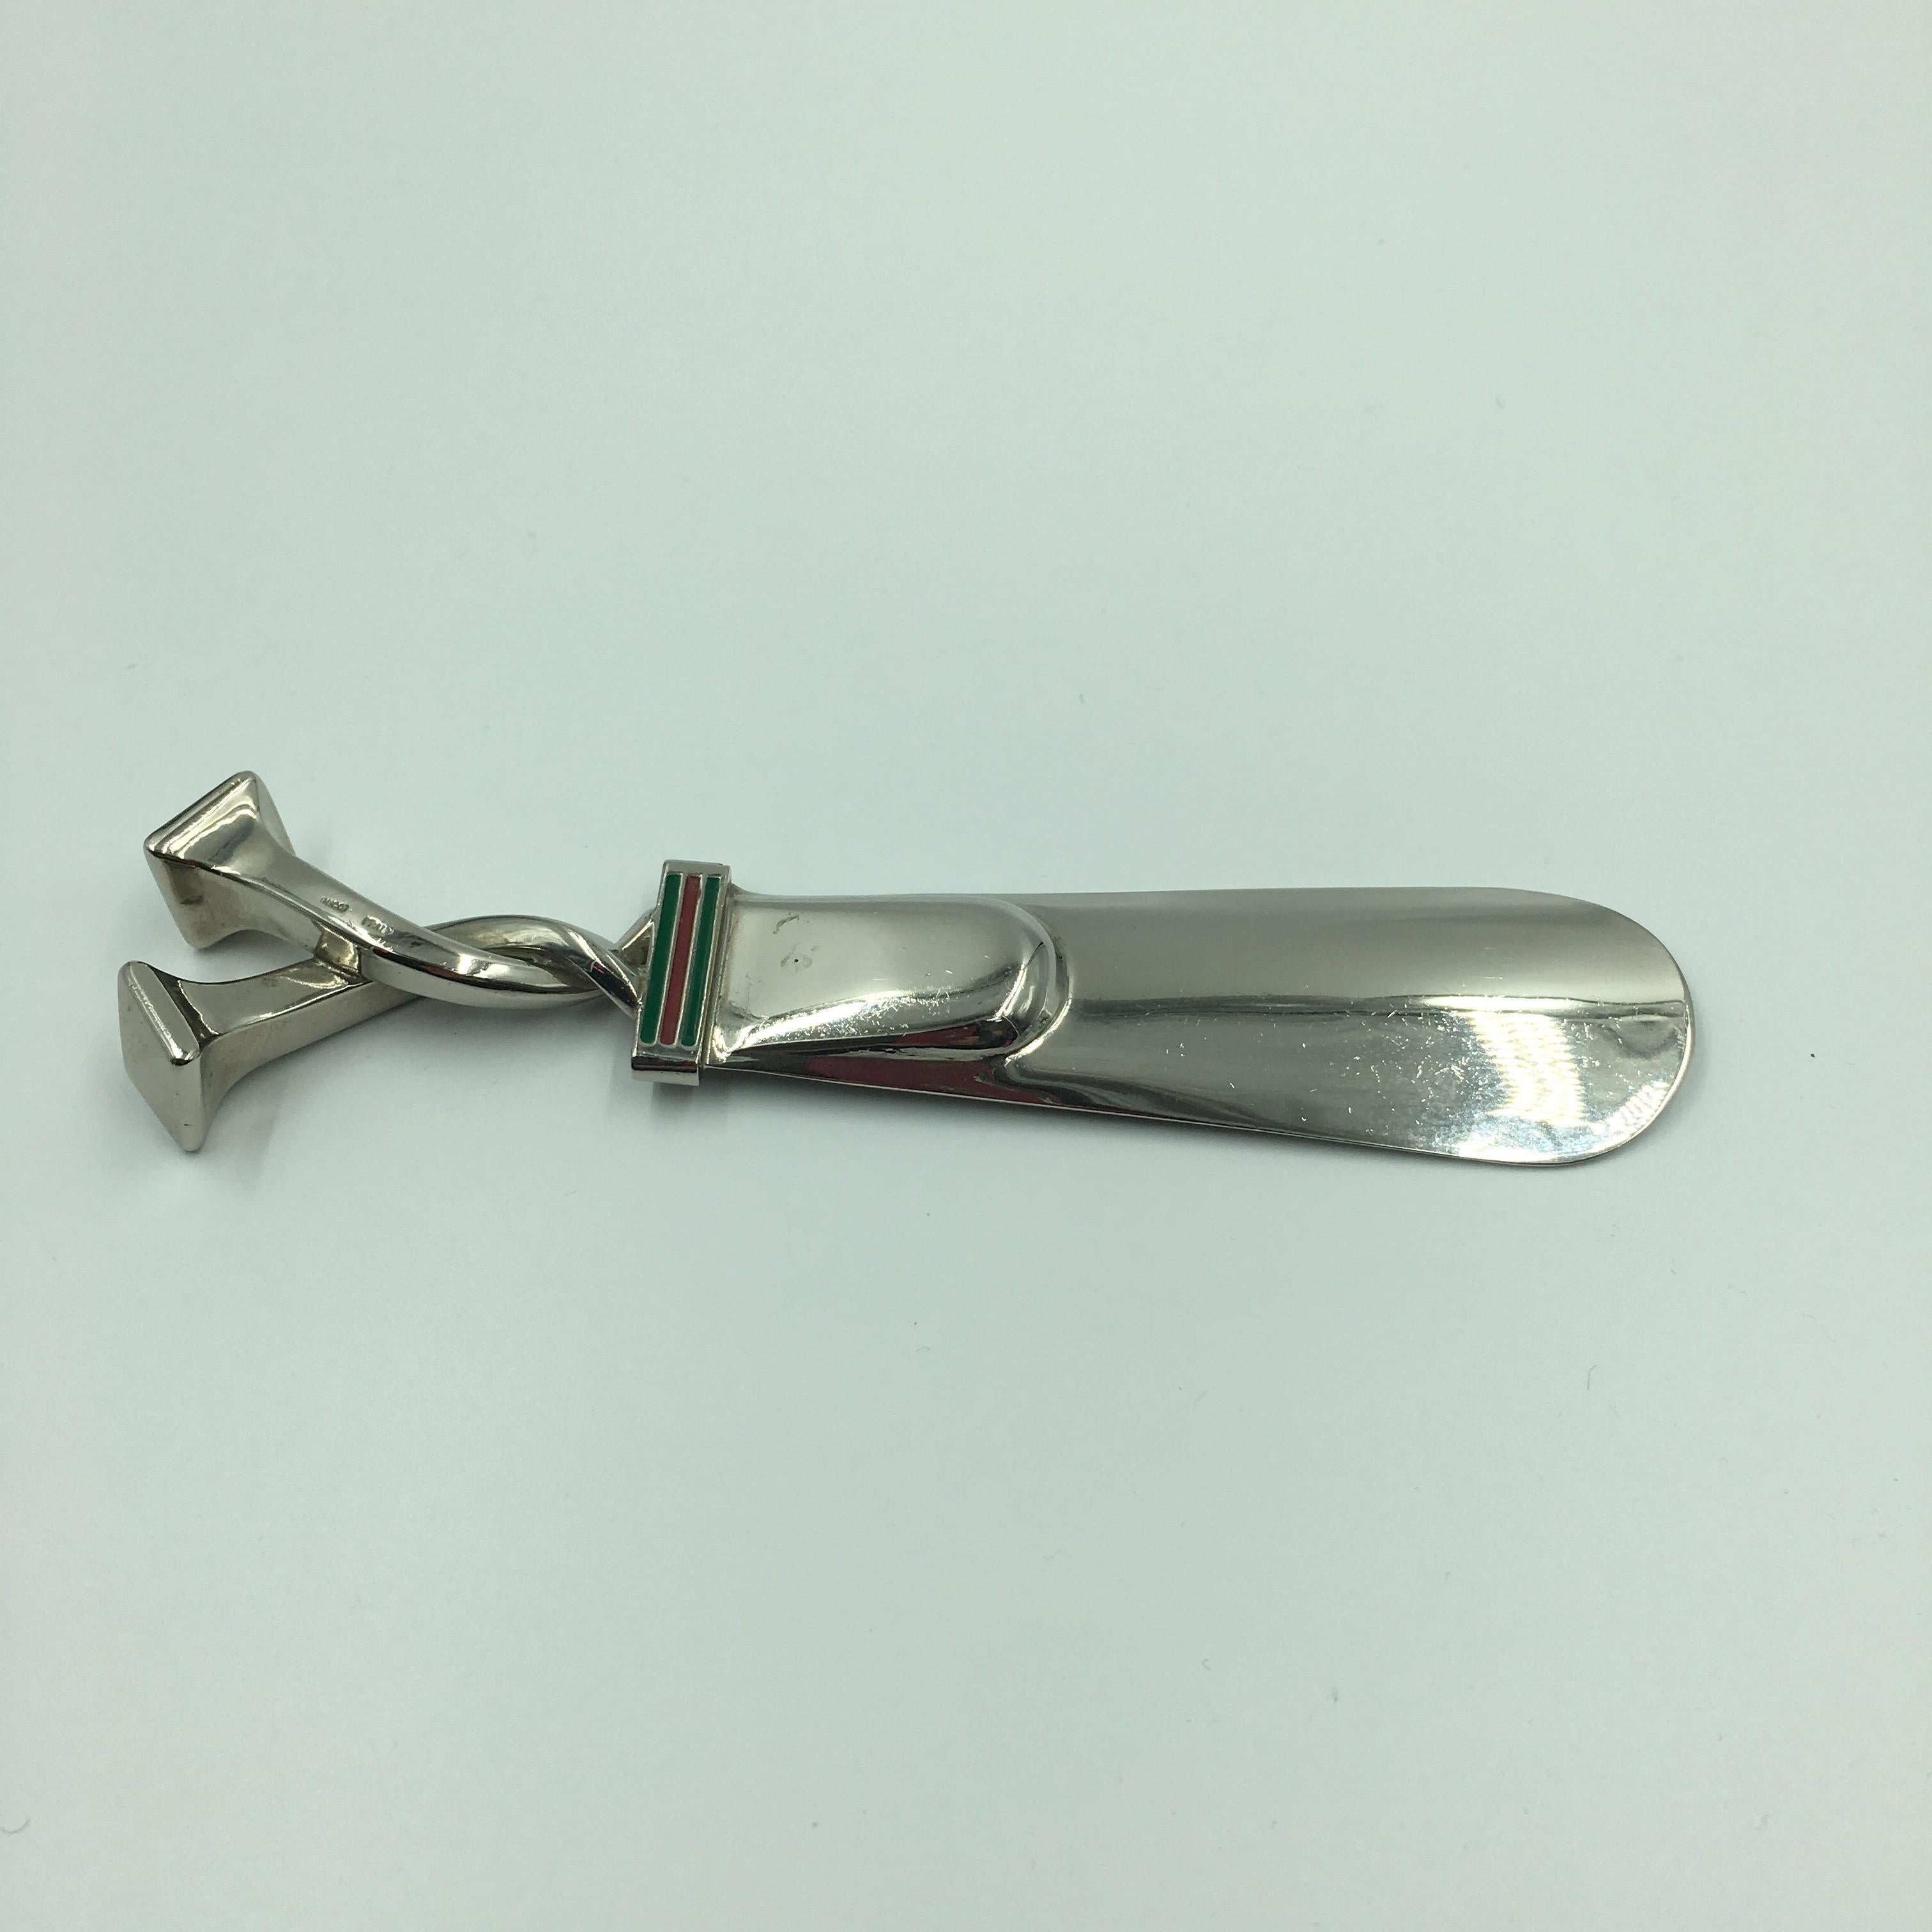 Gucci Shoehorn Silver Tone Metal with Red and Green Classic Enamel Stripe. Front and back feature the classic Gucci red and green stripe, in enamel paint, at bottom of twisted nail head motif handle. Stamped Gucci and Italy on back of twisted